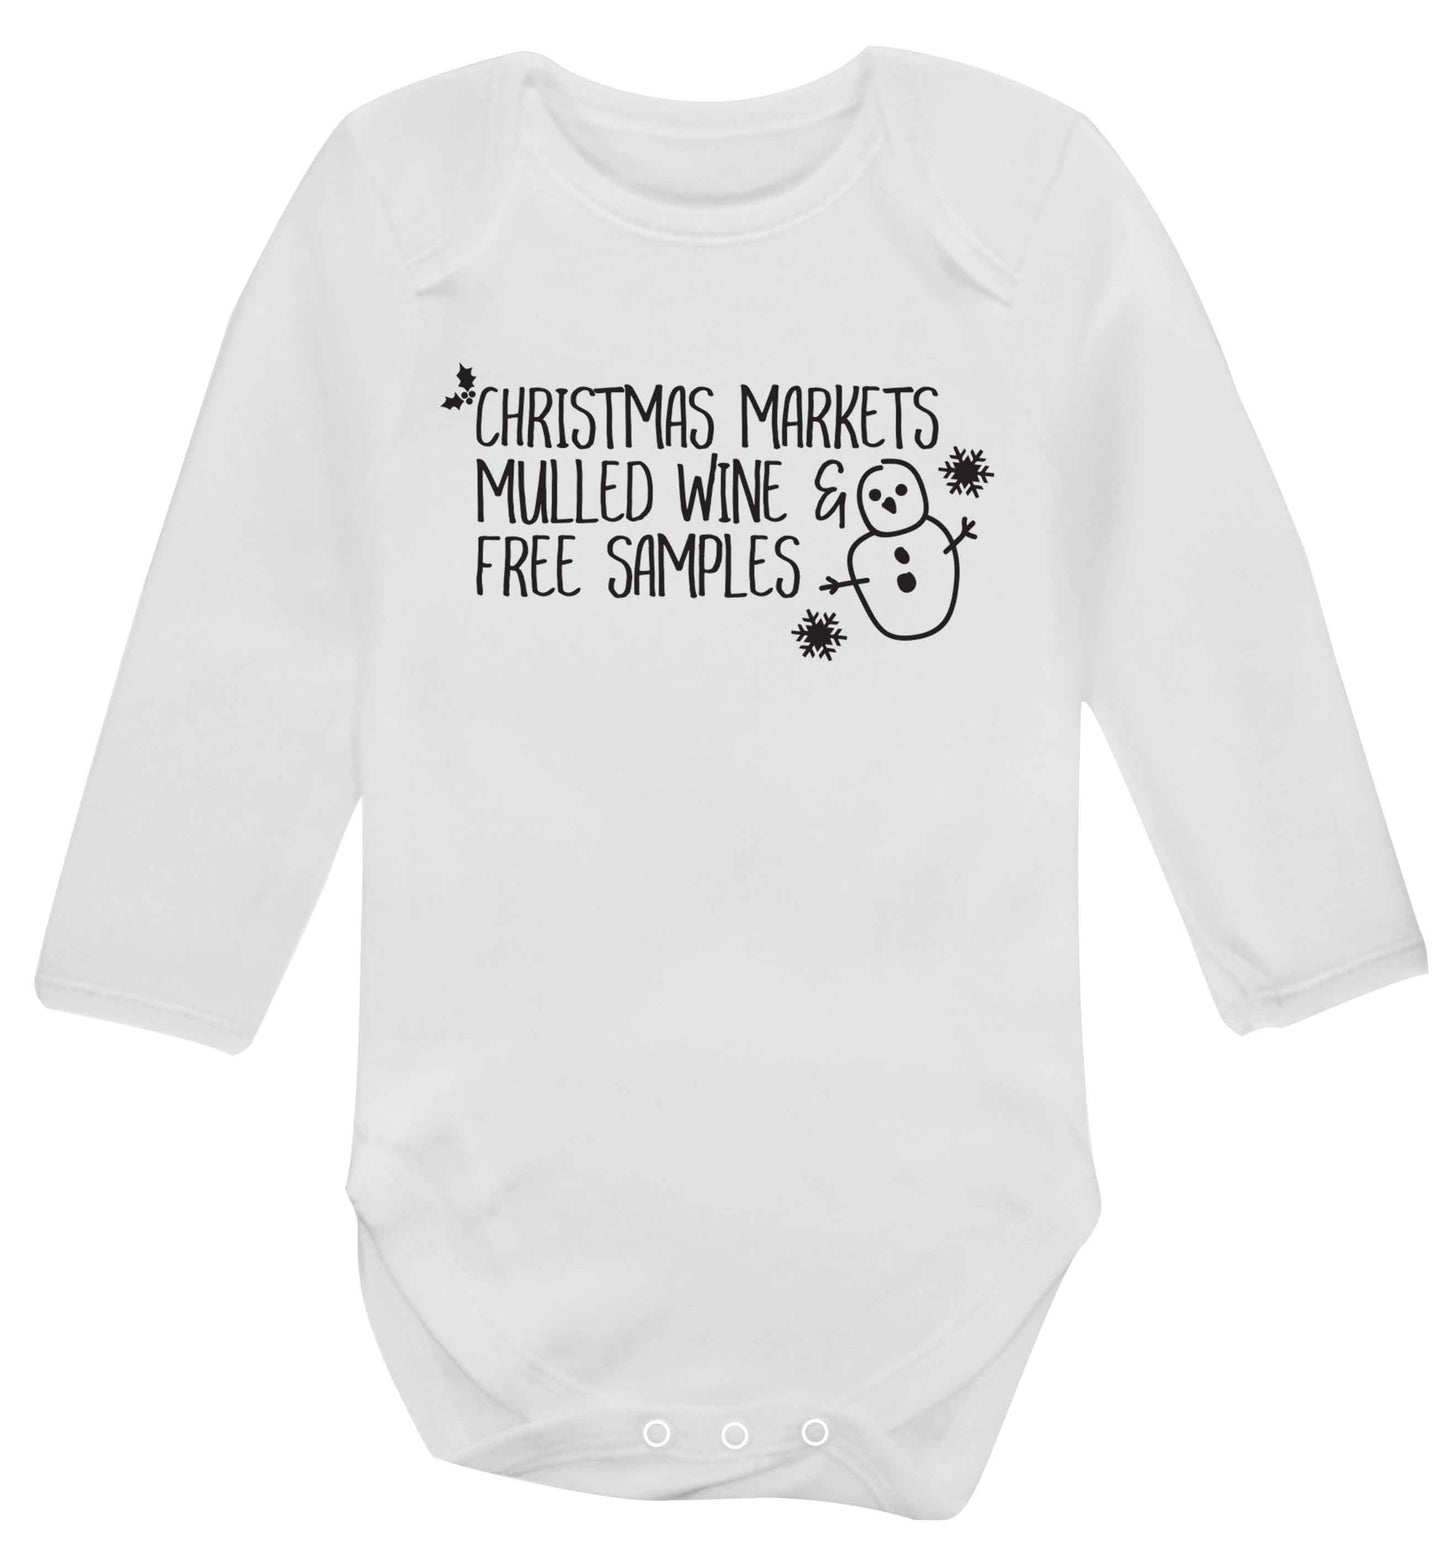 Christmas market mulled wine & free samples Baby Vest long sleeved white 6-12 months